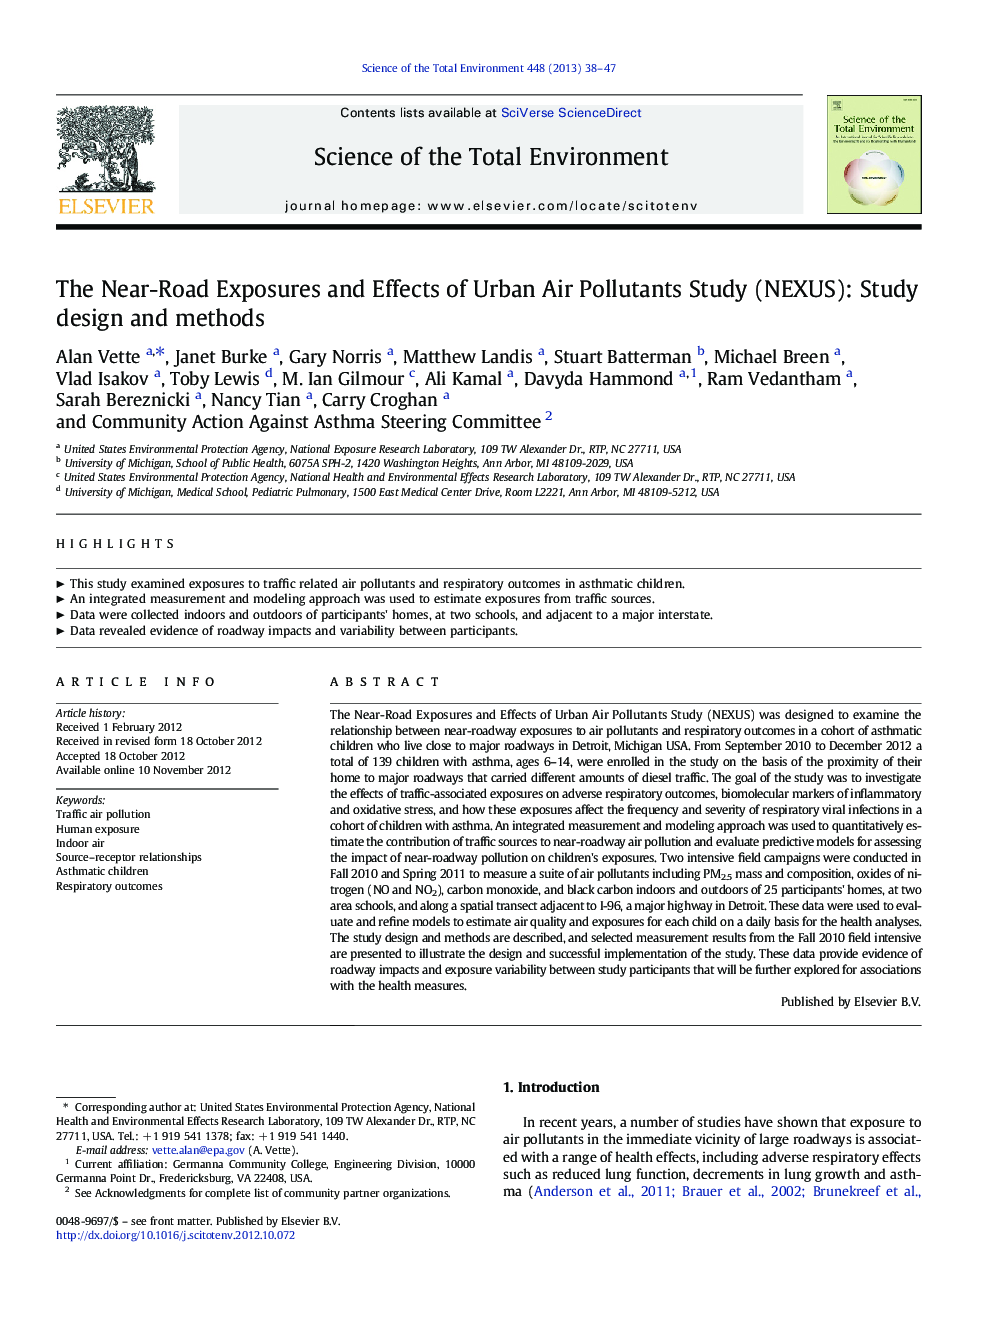 The Near-Road Exposures and Effects of Urban Air Pollutants Study (NEXUS): Study design and methods